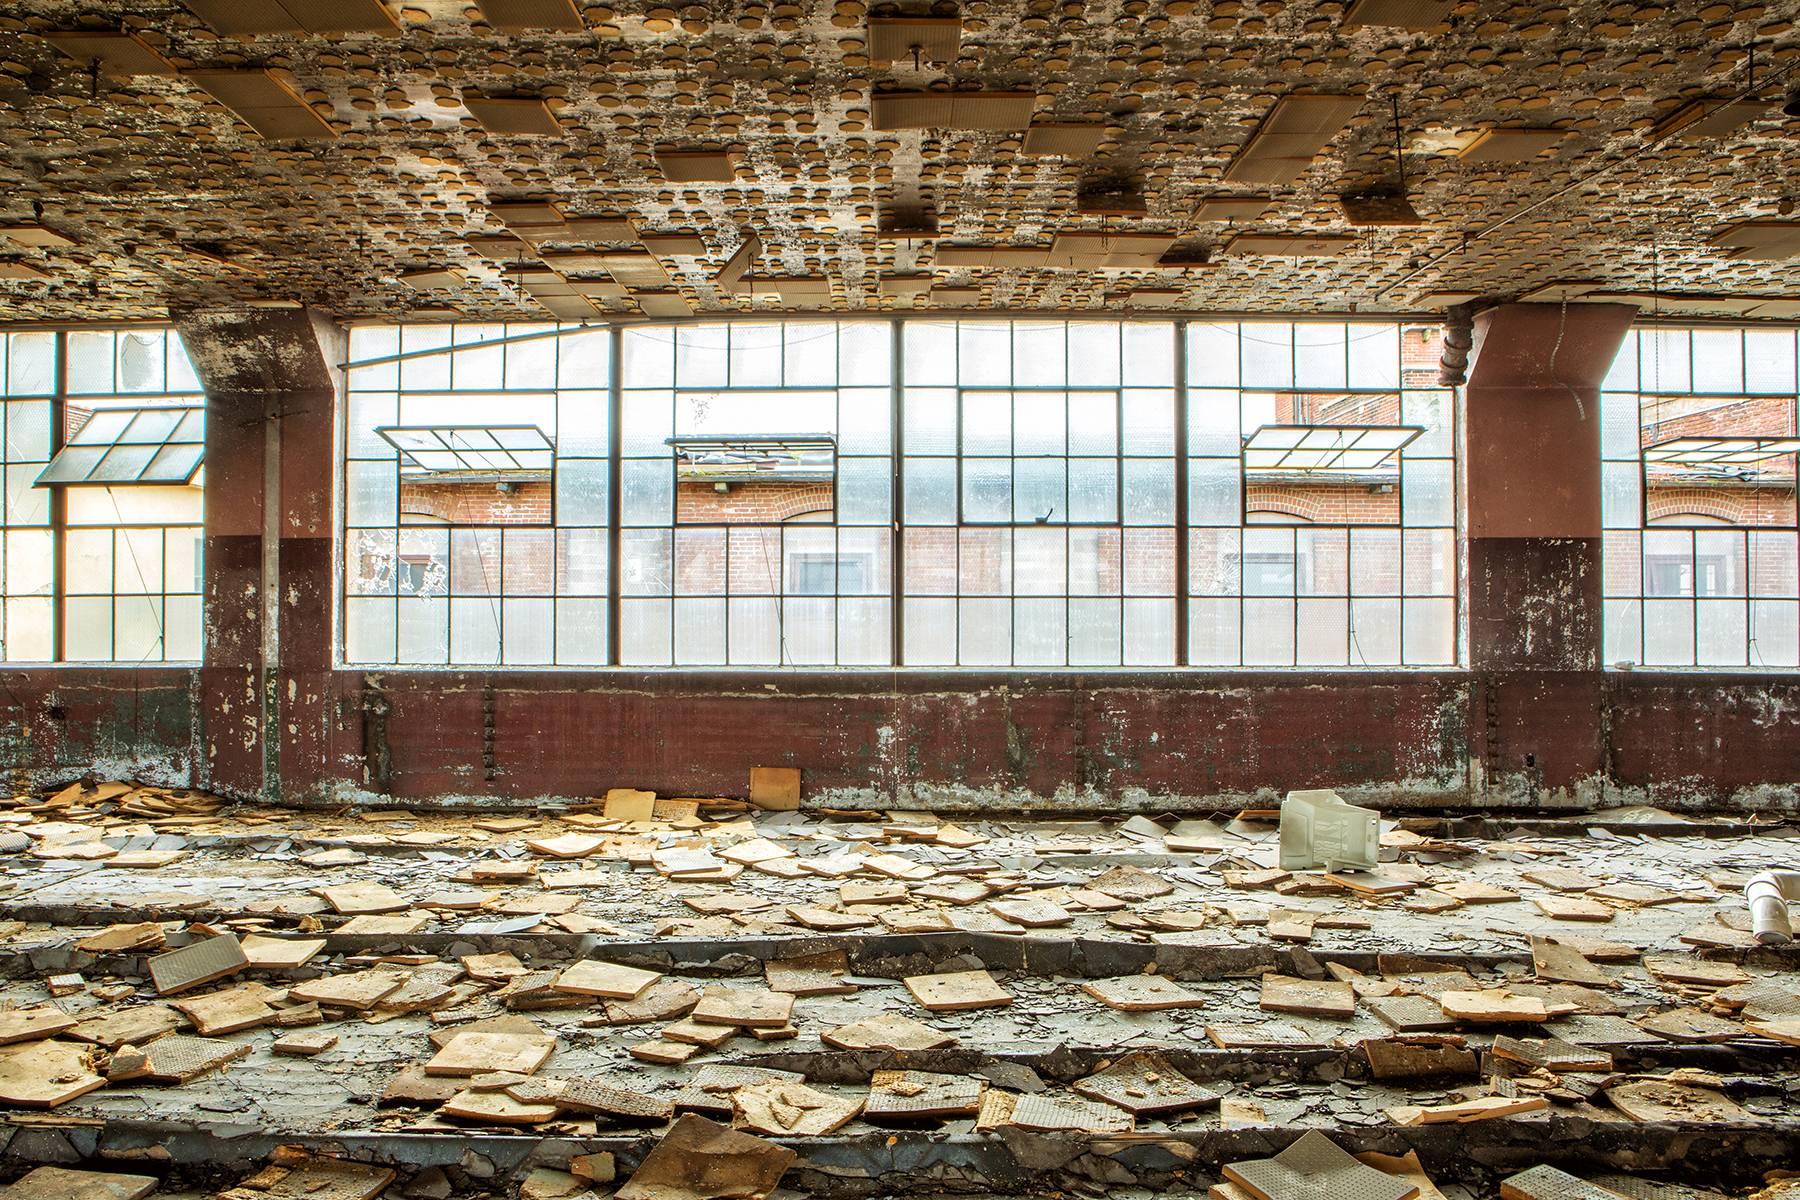 "Domino Room", color photo, abandoned, factory, industrial, windows, brown